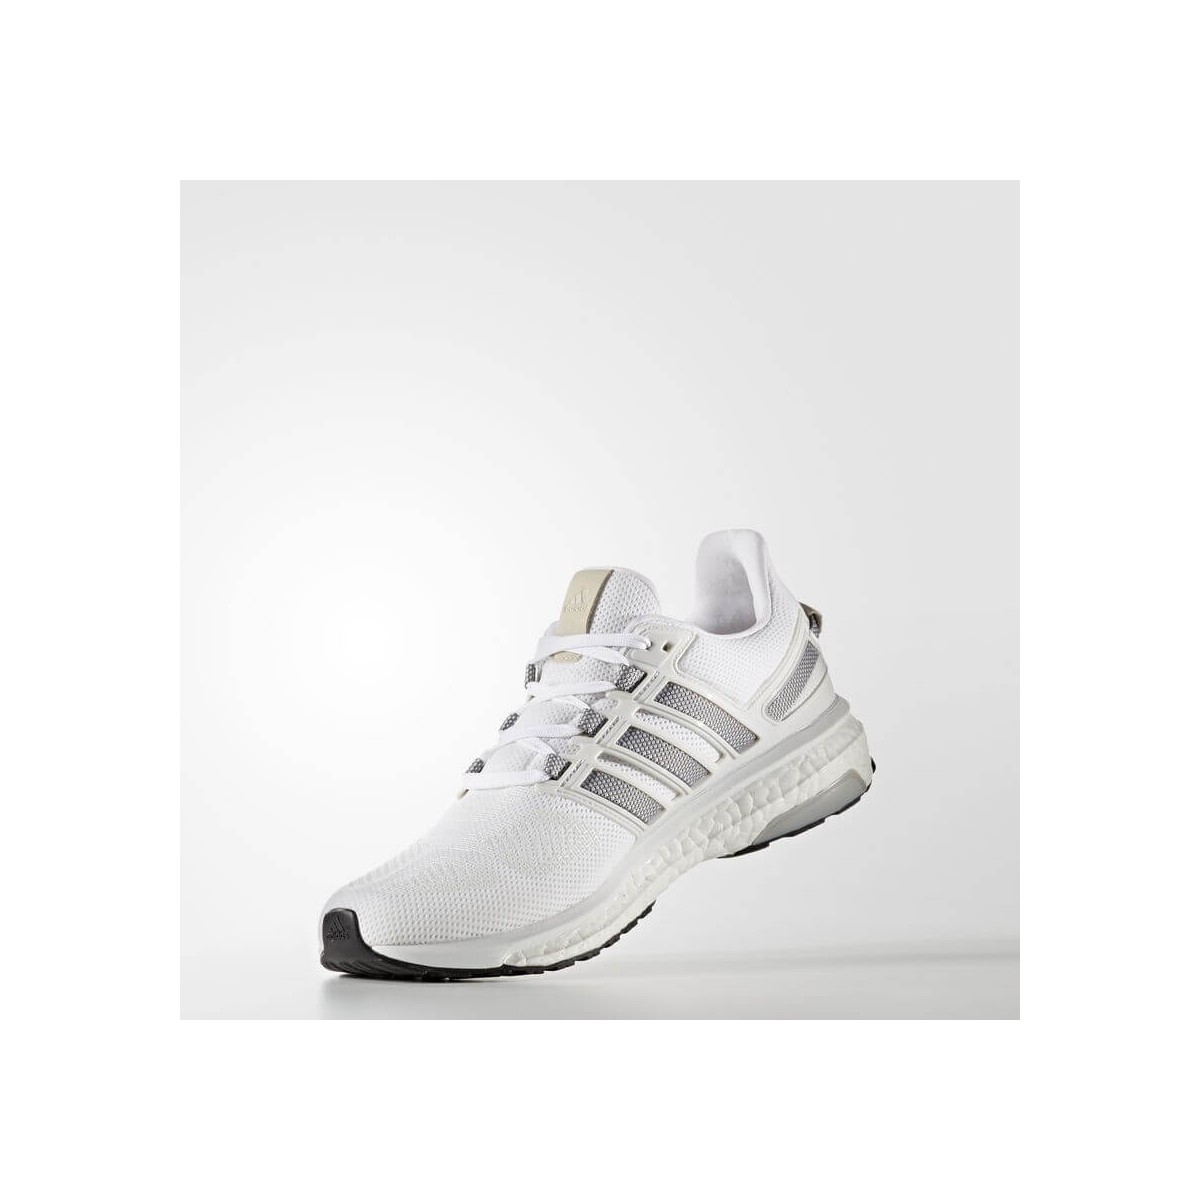 Adidas Energy Boost 3 Shoes